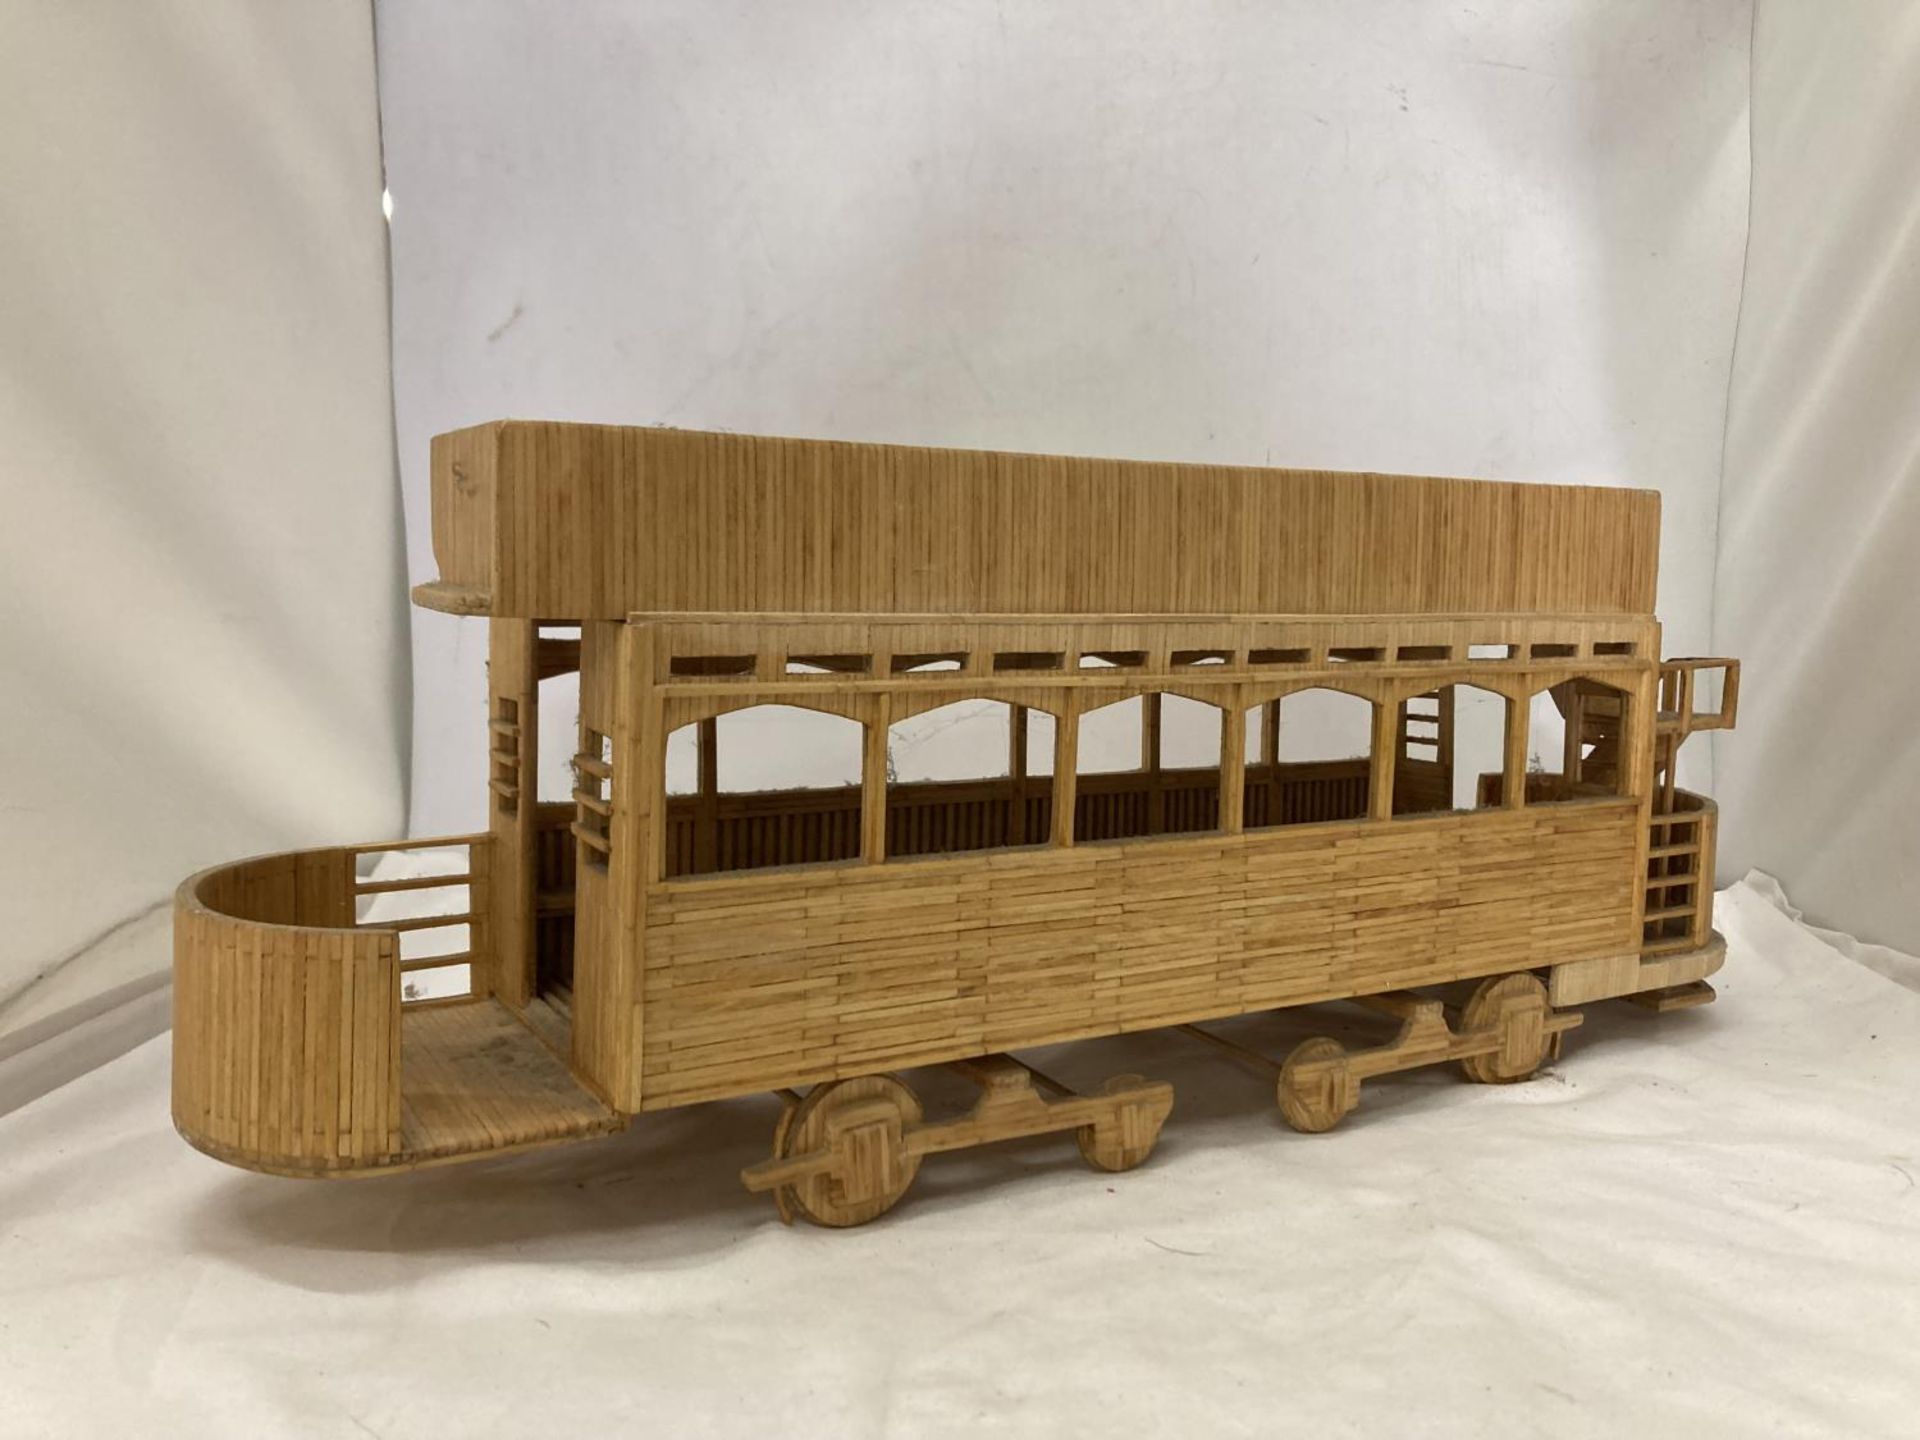 A QUANTITY OF MODELS MADE WITH WOOD AND MATCHSTICKS TO INCLUDE TRAINS, A TRAM, TRUCK, ETC - Image 4 of 7